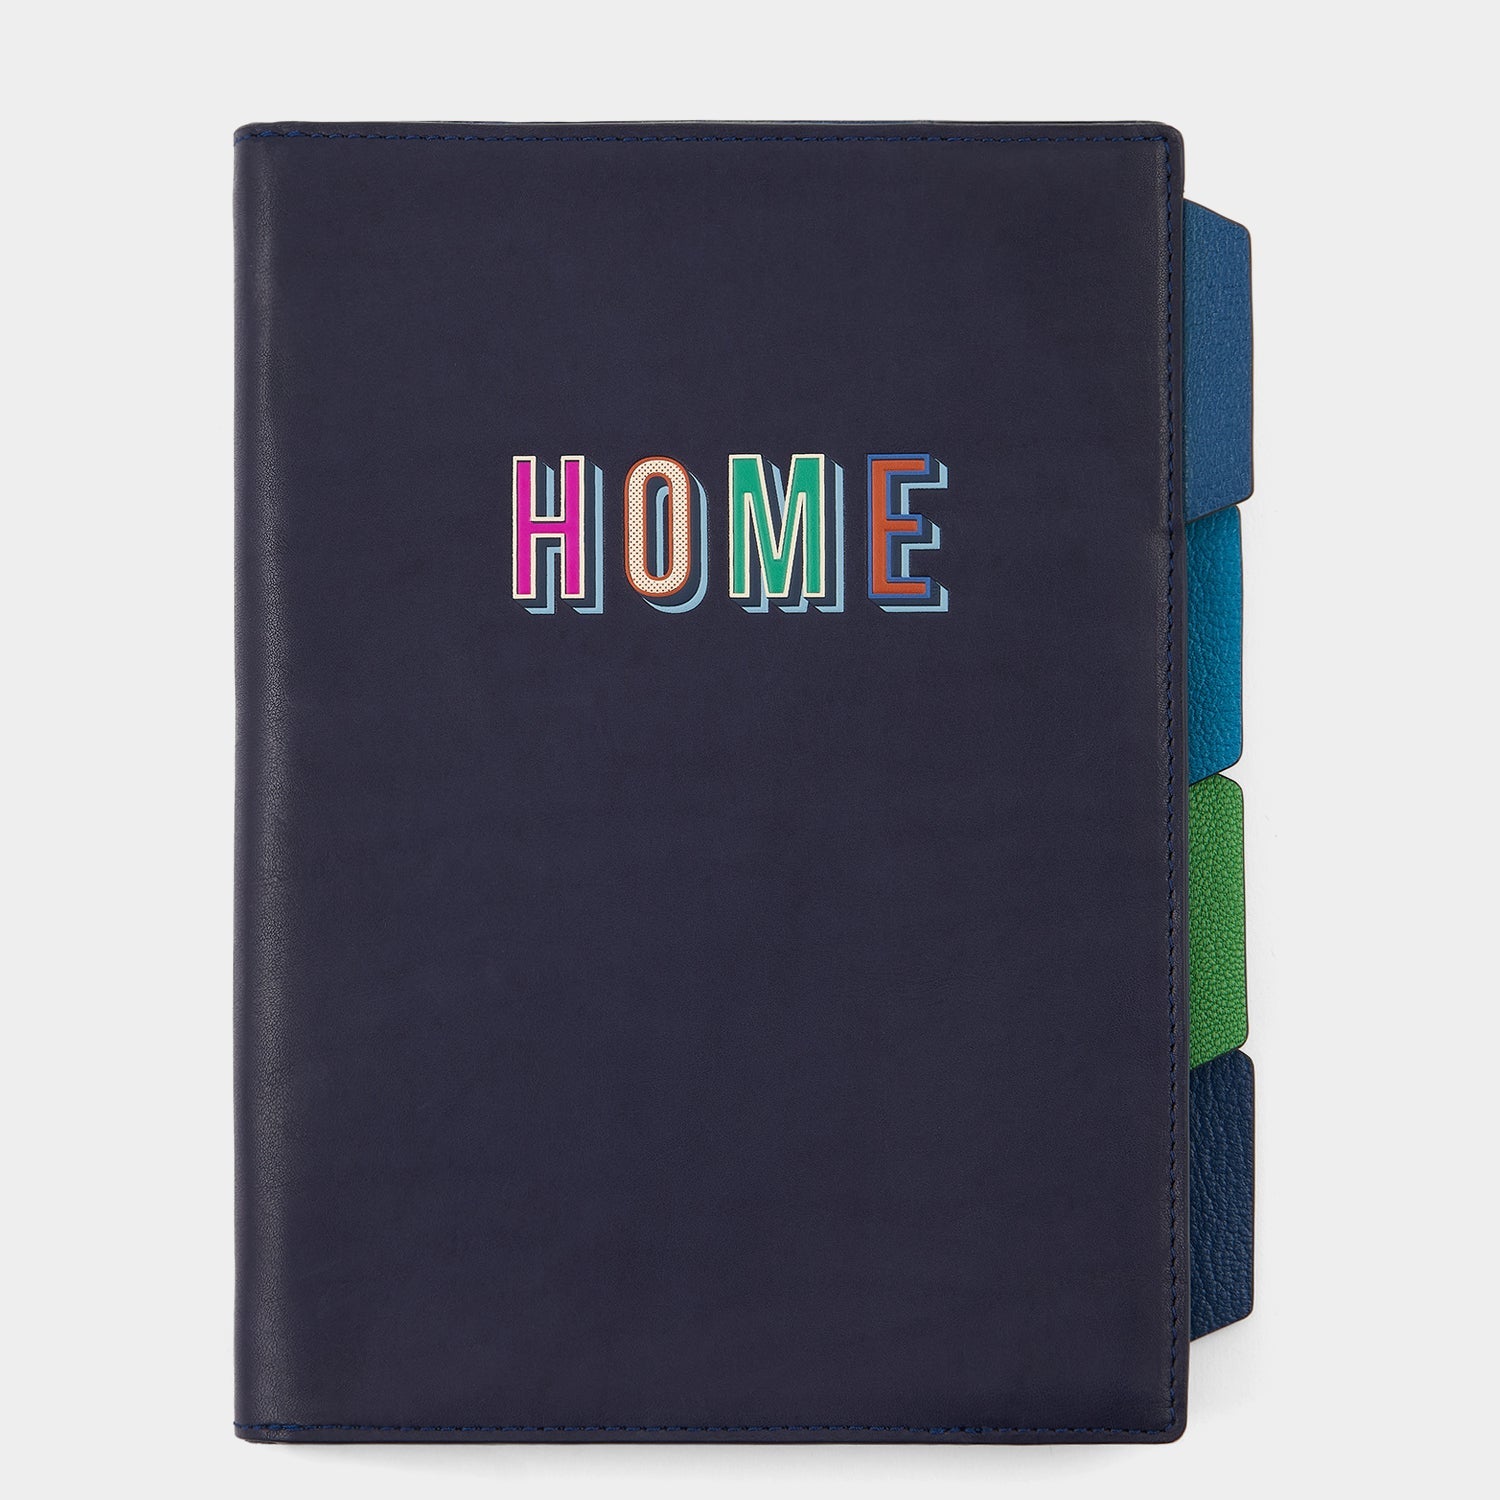 Home Work A5 Two Way Journal